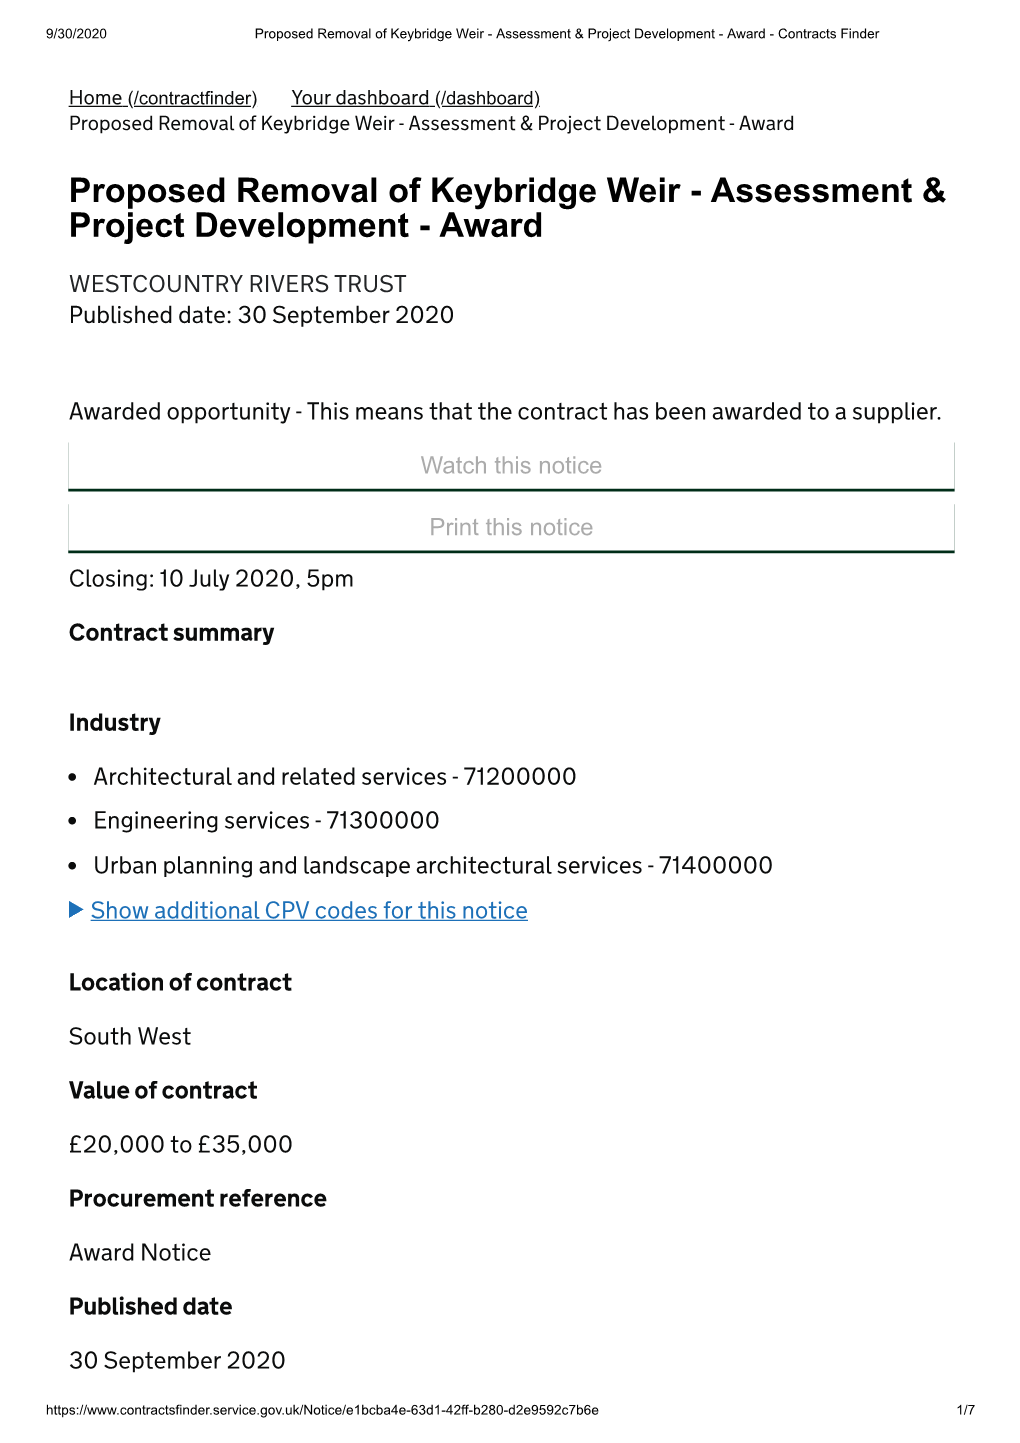 Proposed Removal of Keybridge Weir - Assessment & Project Development - Award - Contracts Finder